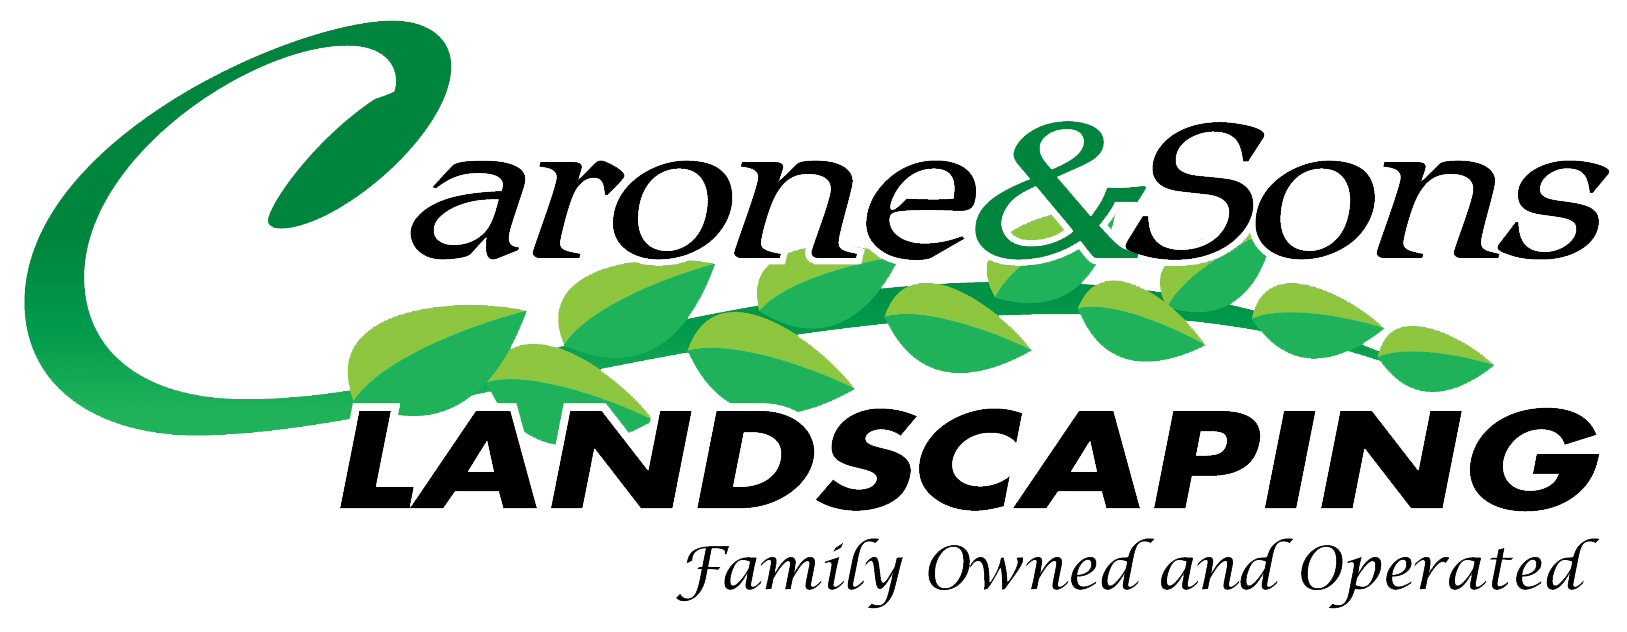 Carone & Sons Landscaping